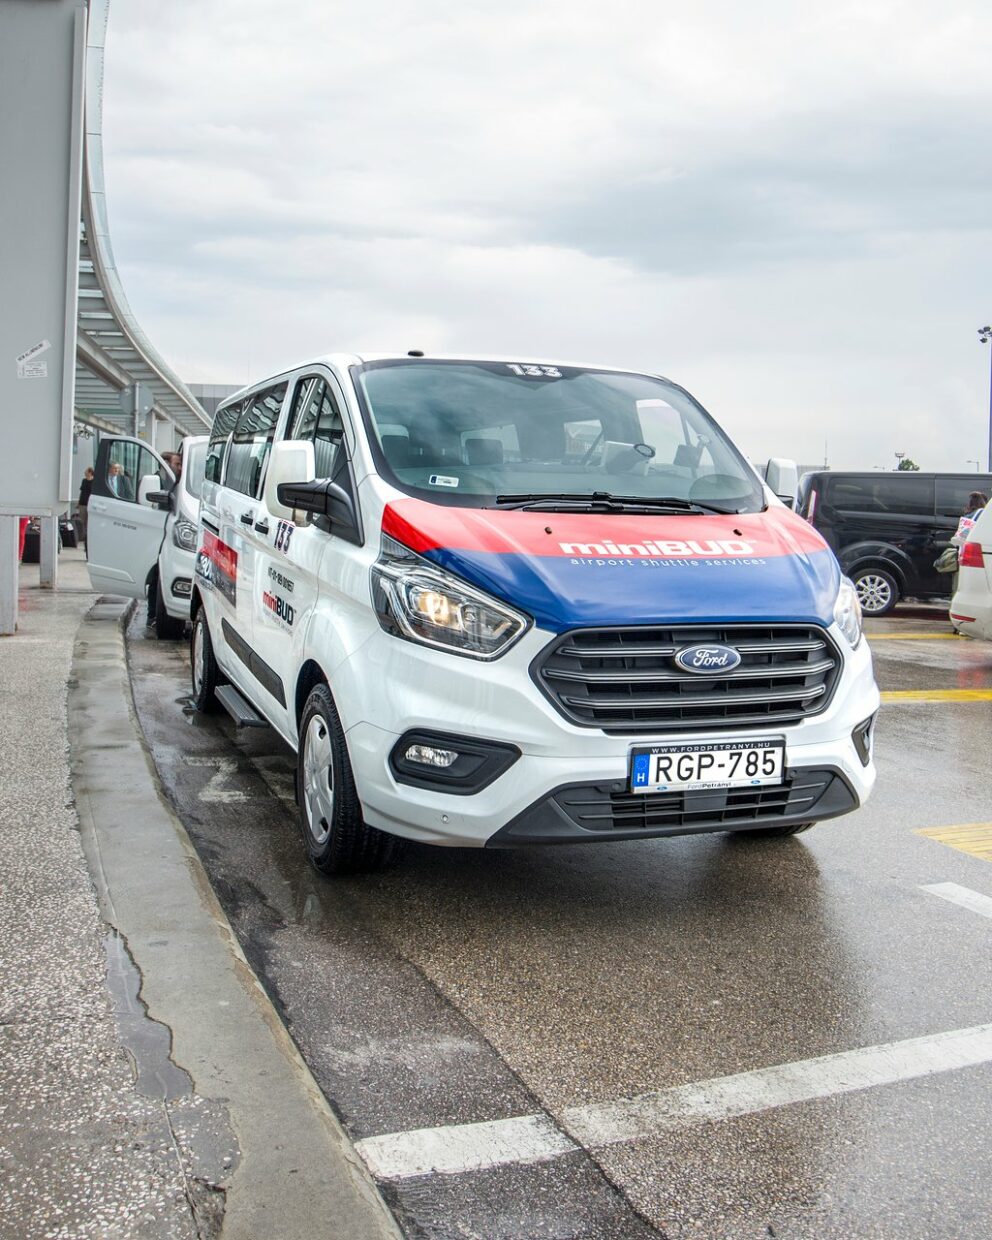 MiniBUD, the official transfer service provider of Budapest Airport